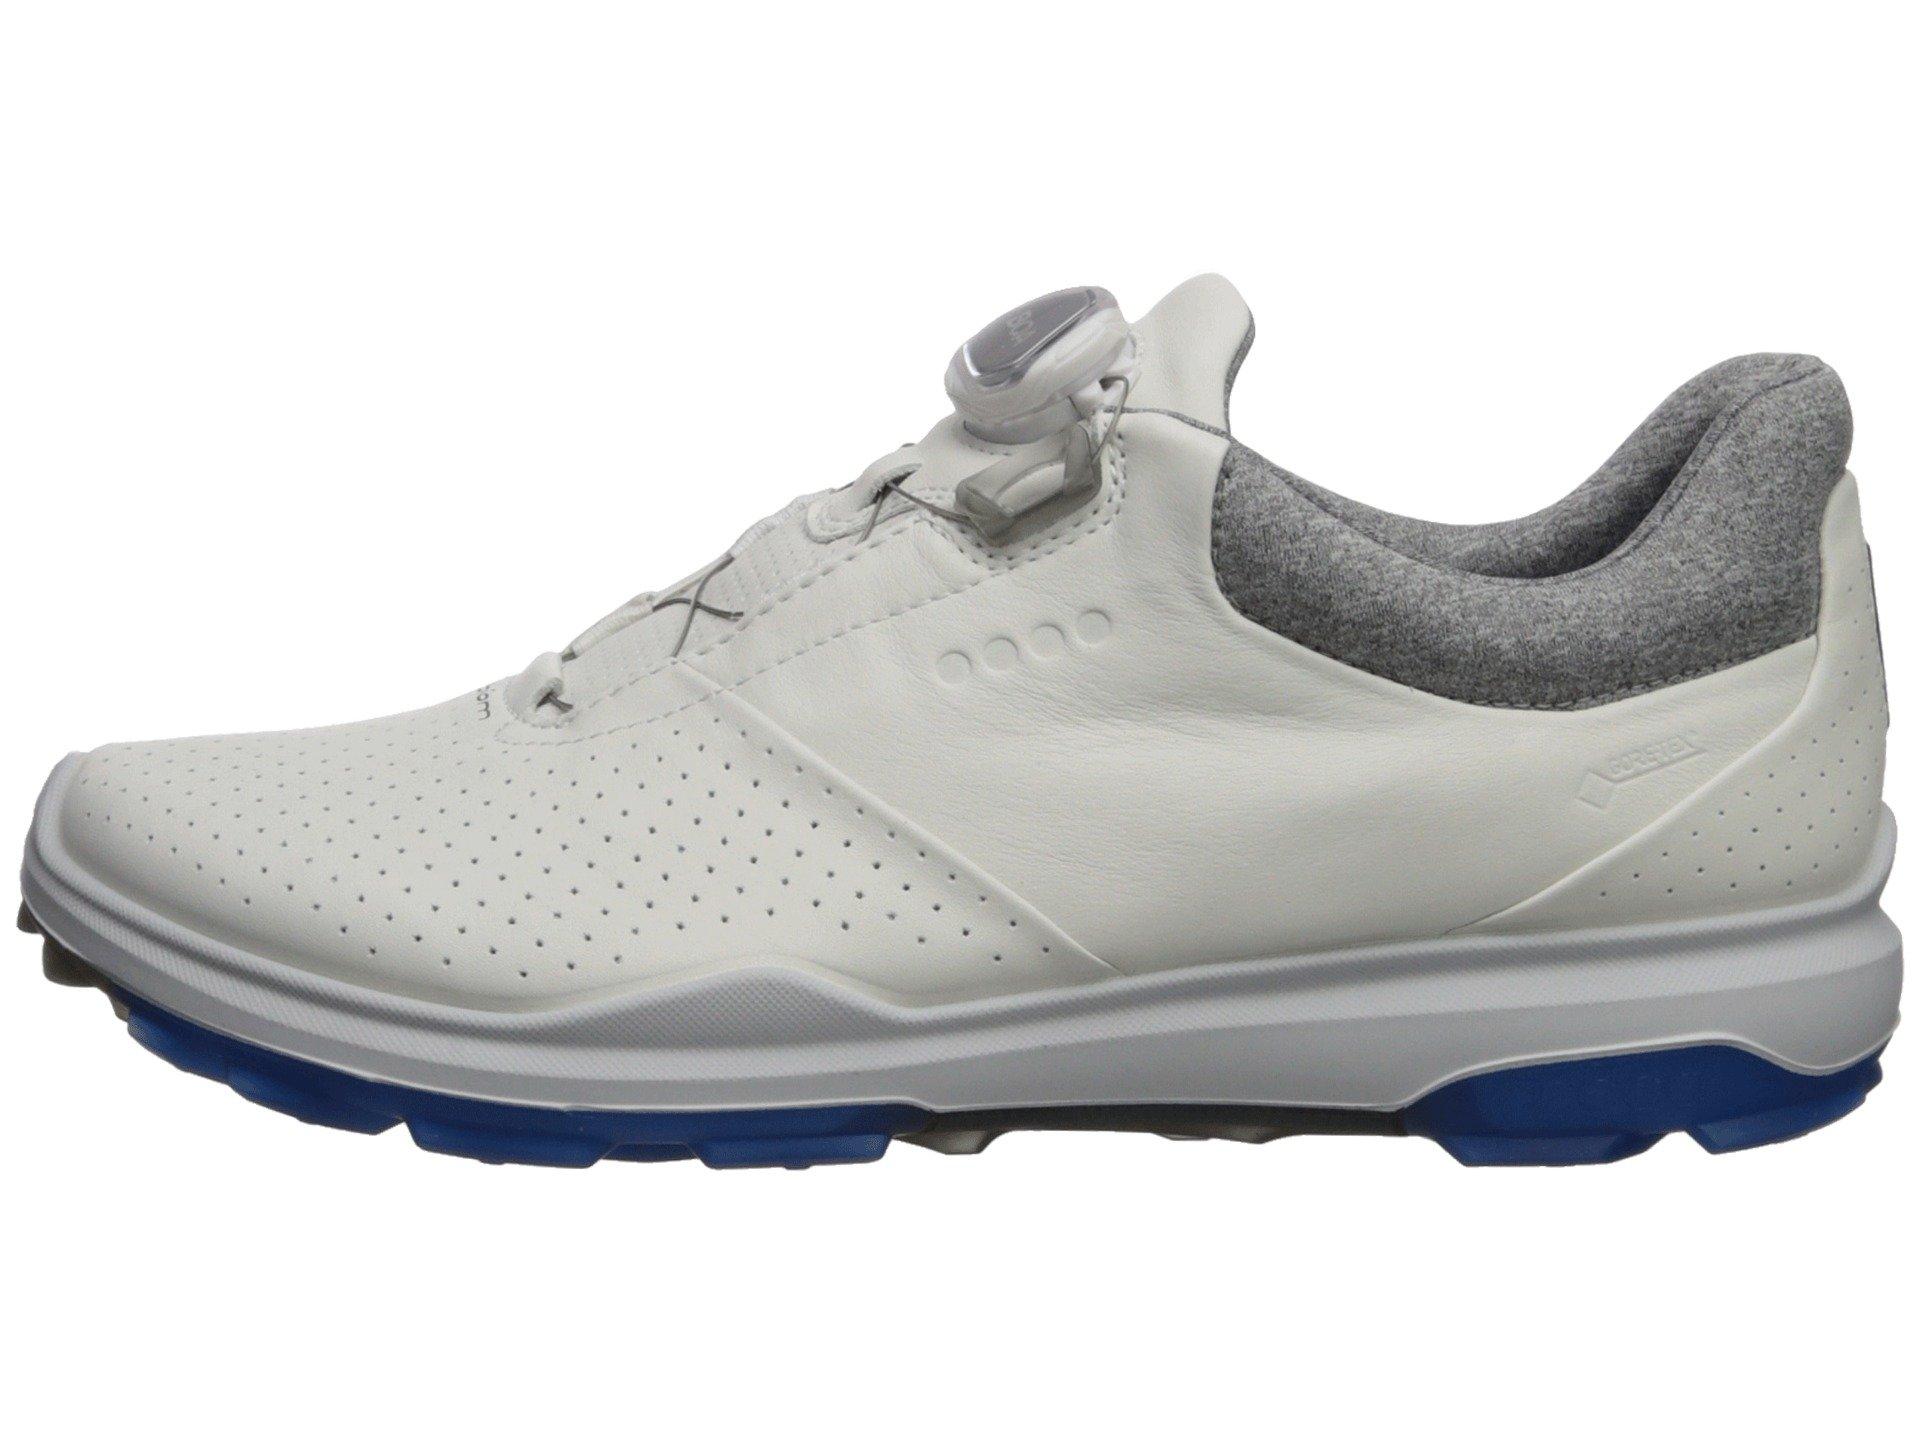 How to choose the best boa golf shoes?